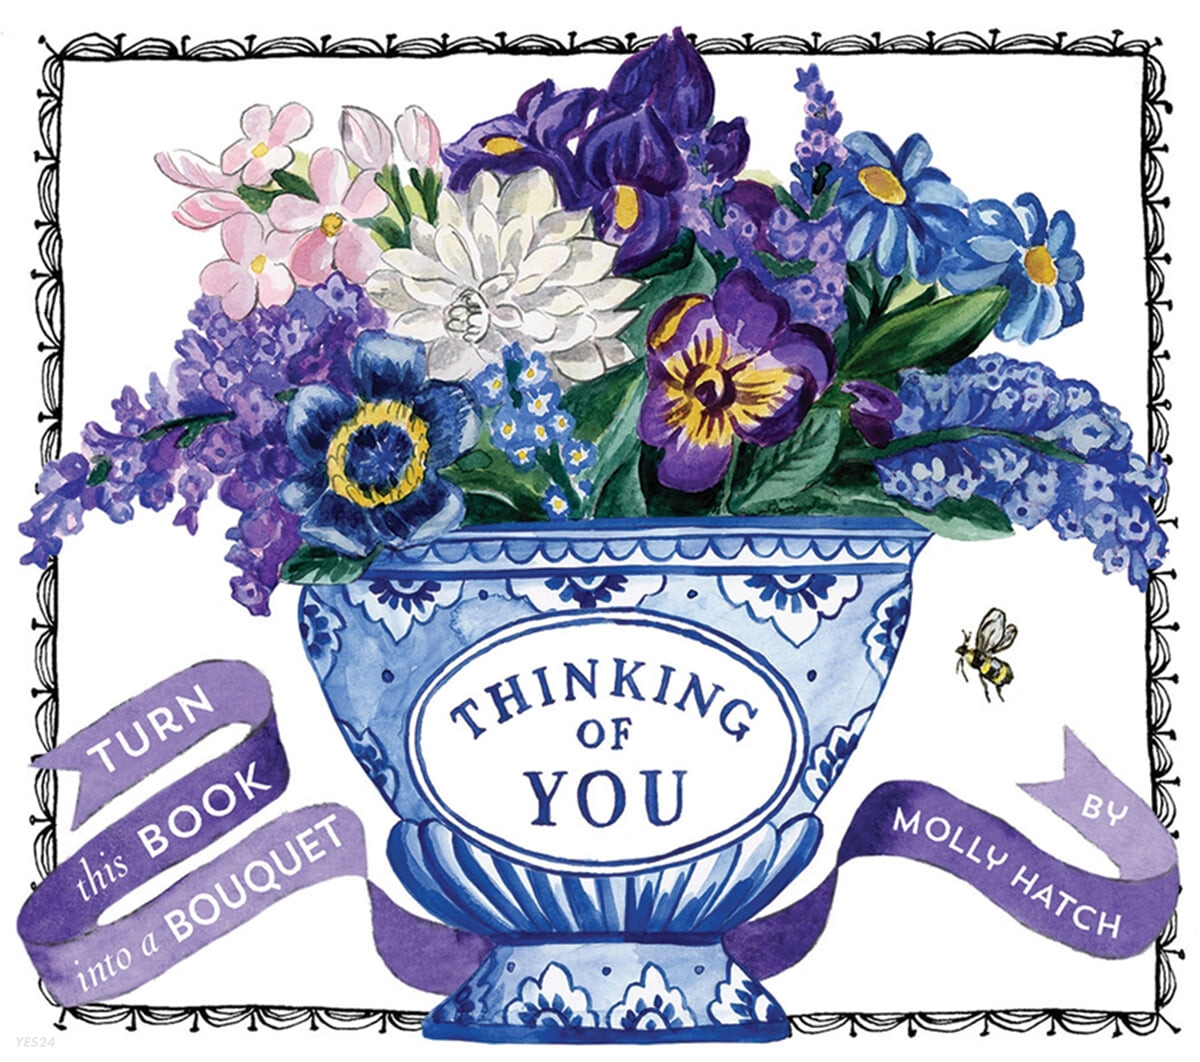 Thinking of You (Uplifting Editions): Turn This Book Into a Bouquet (Turn This Book Into a Bouquet)